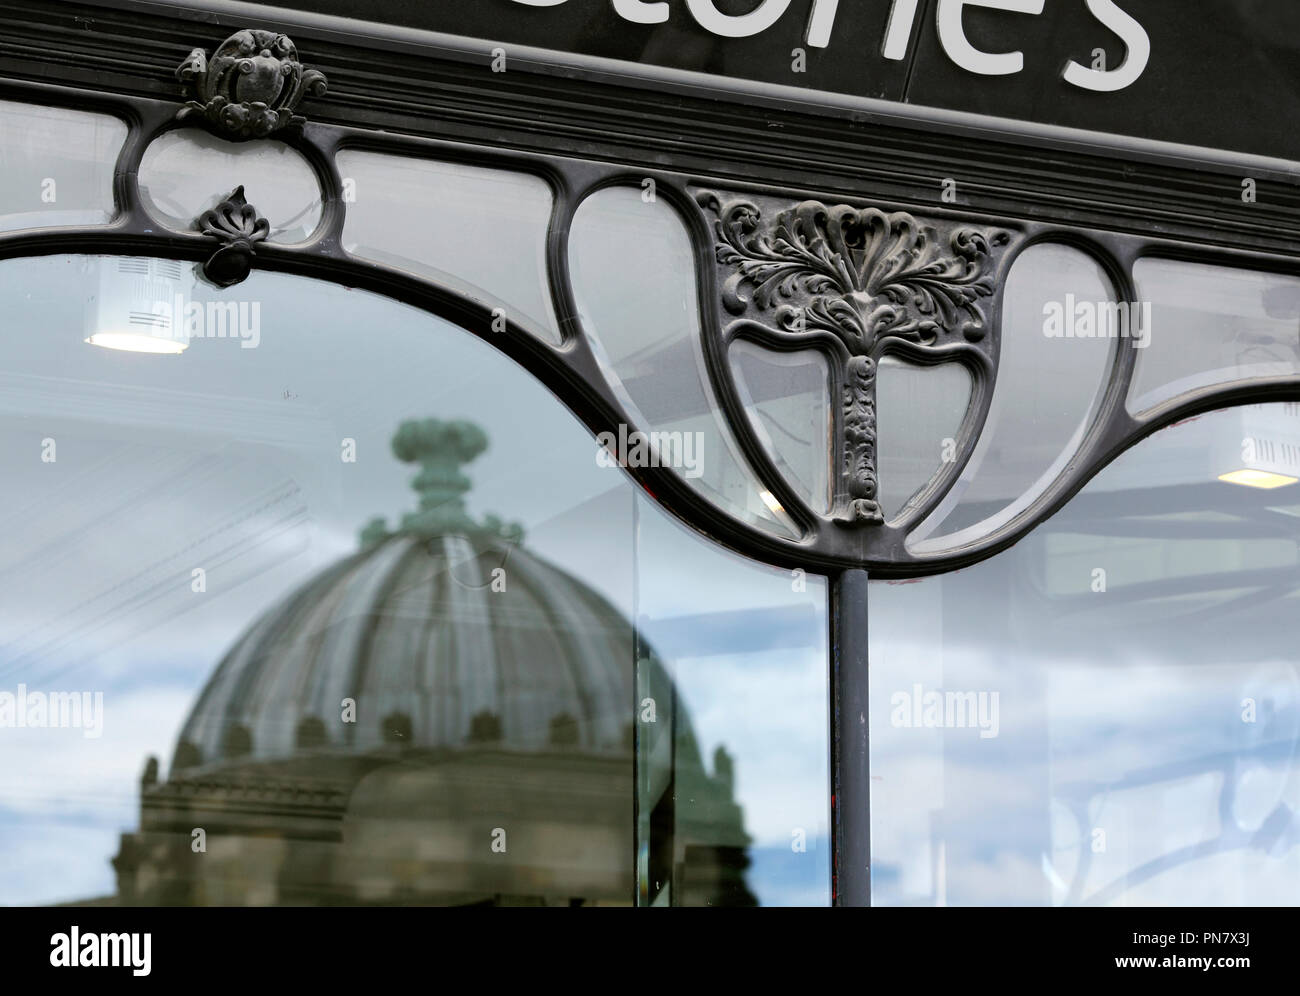 One of the domes of Newcastle upon Tyne's Market Arcade, reflected in the Art Nouveau style windows of Waterstone's bookshop on Blackett Street. Stock Photo